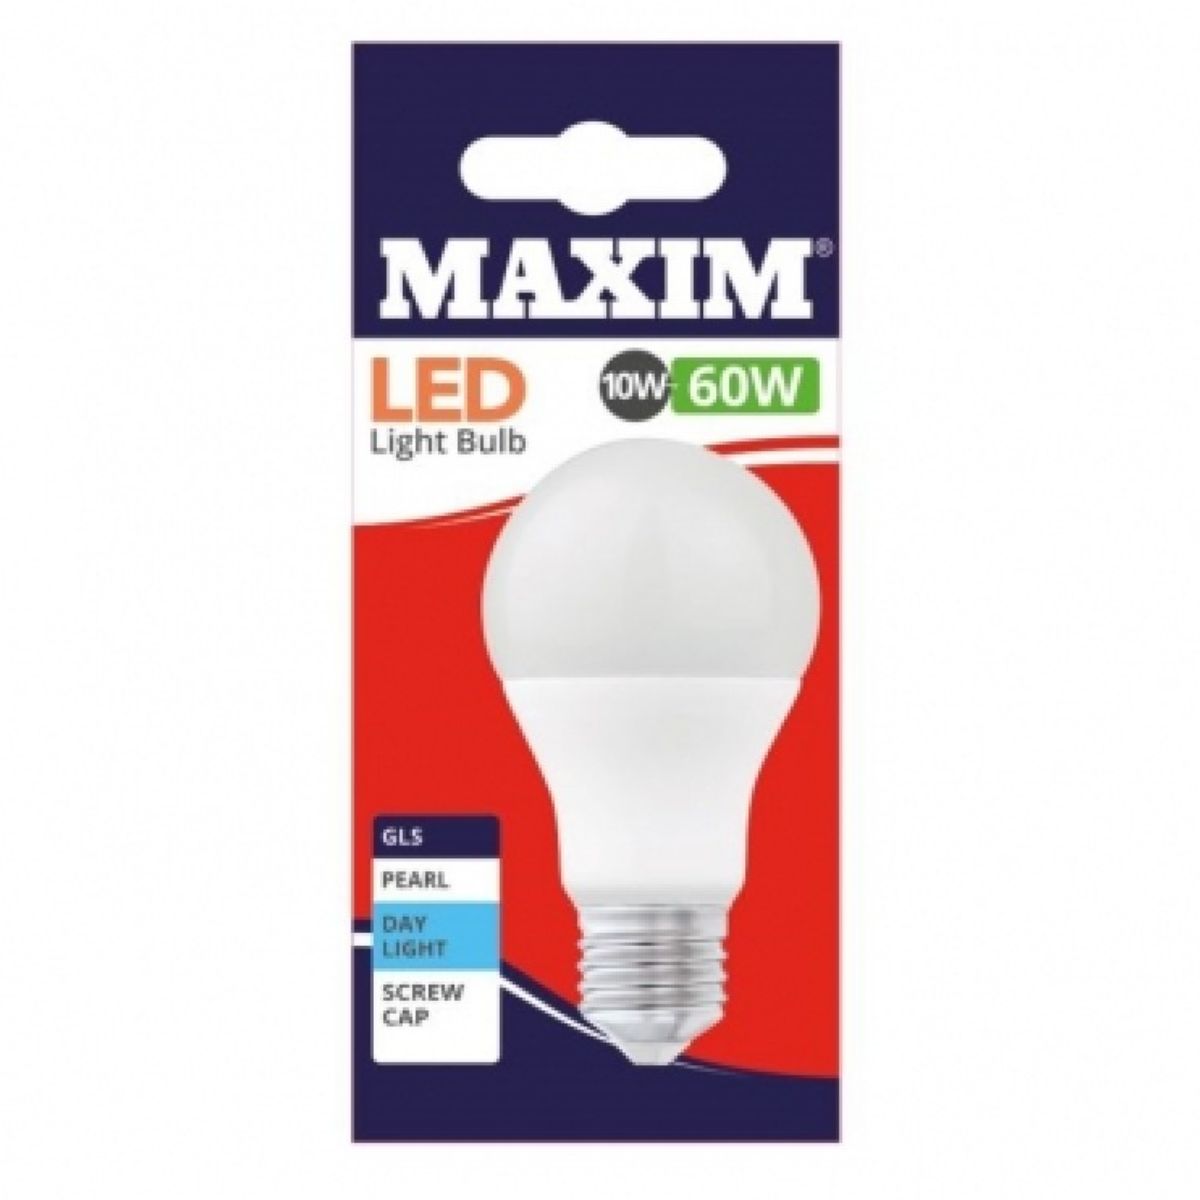 Packaging of a Maxim - LED Low Energy Screw Light Bulb 10W=60W - Daylight with a screw cap, equivalent to a 60w traditional bulb, advertised with a "day light" color tone.